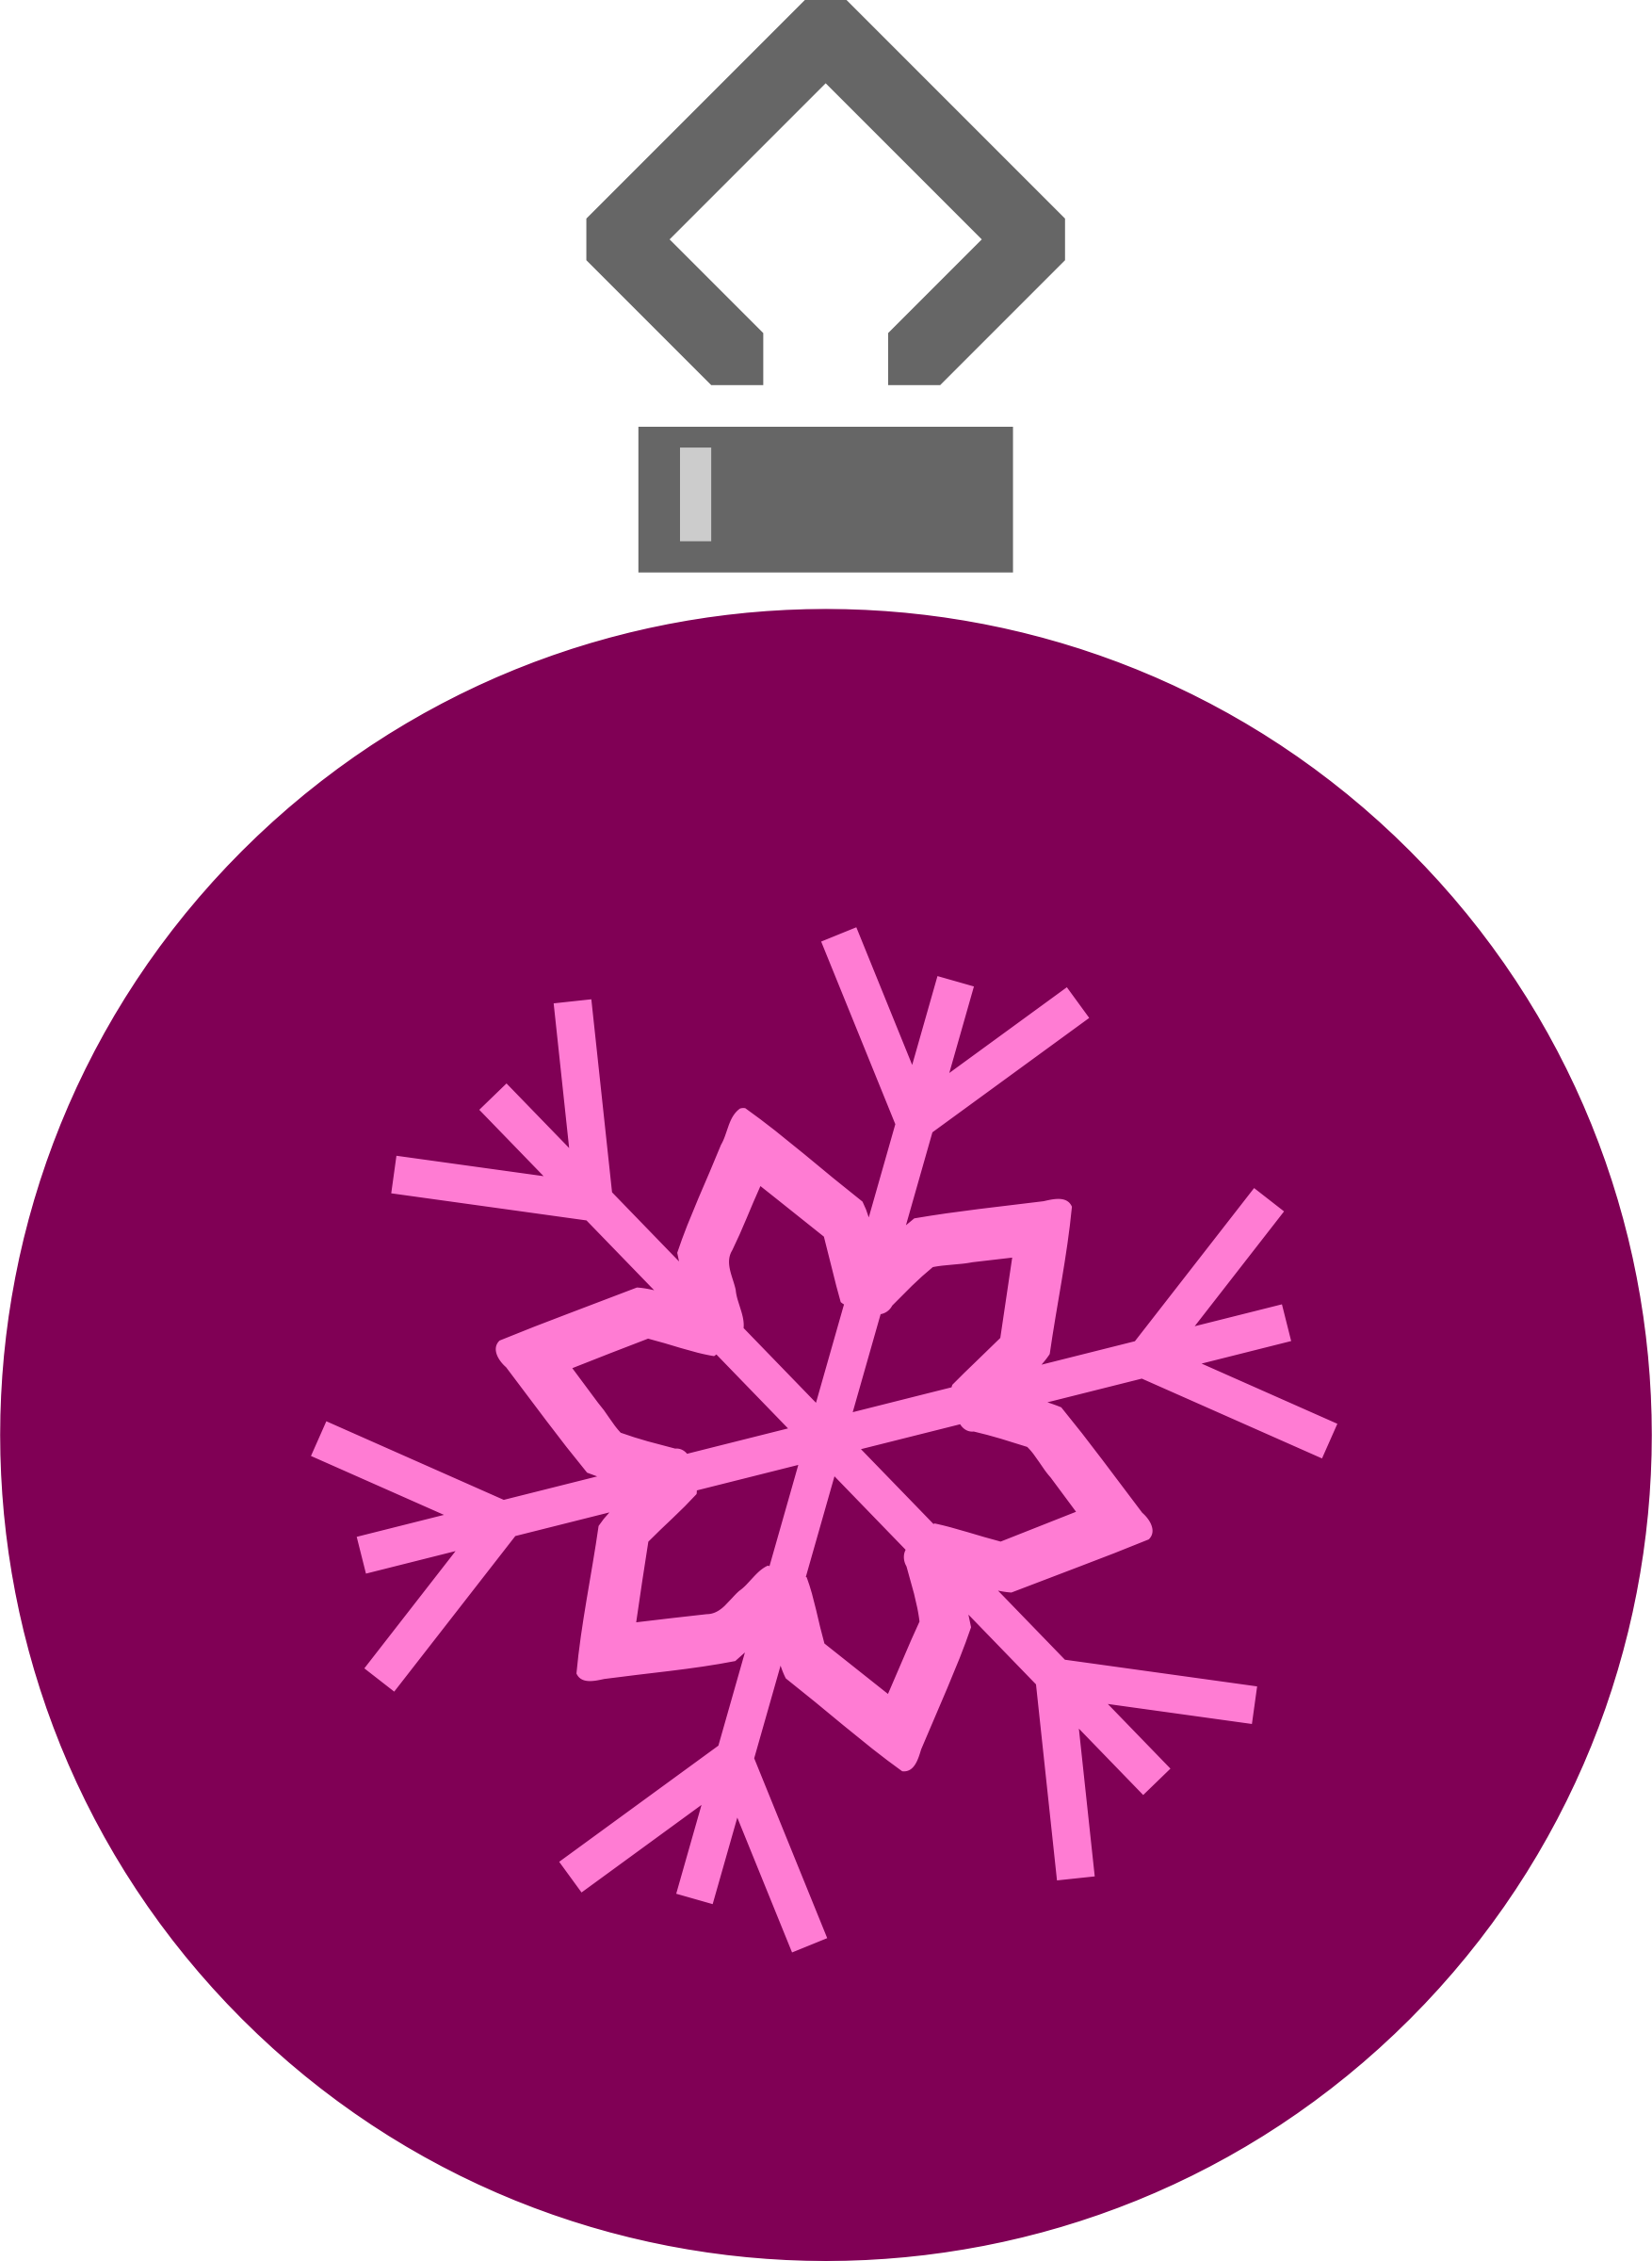 Simple Tree Bauble 12 - Christmas Ornament Silhouette (1754x2400)